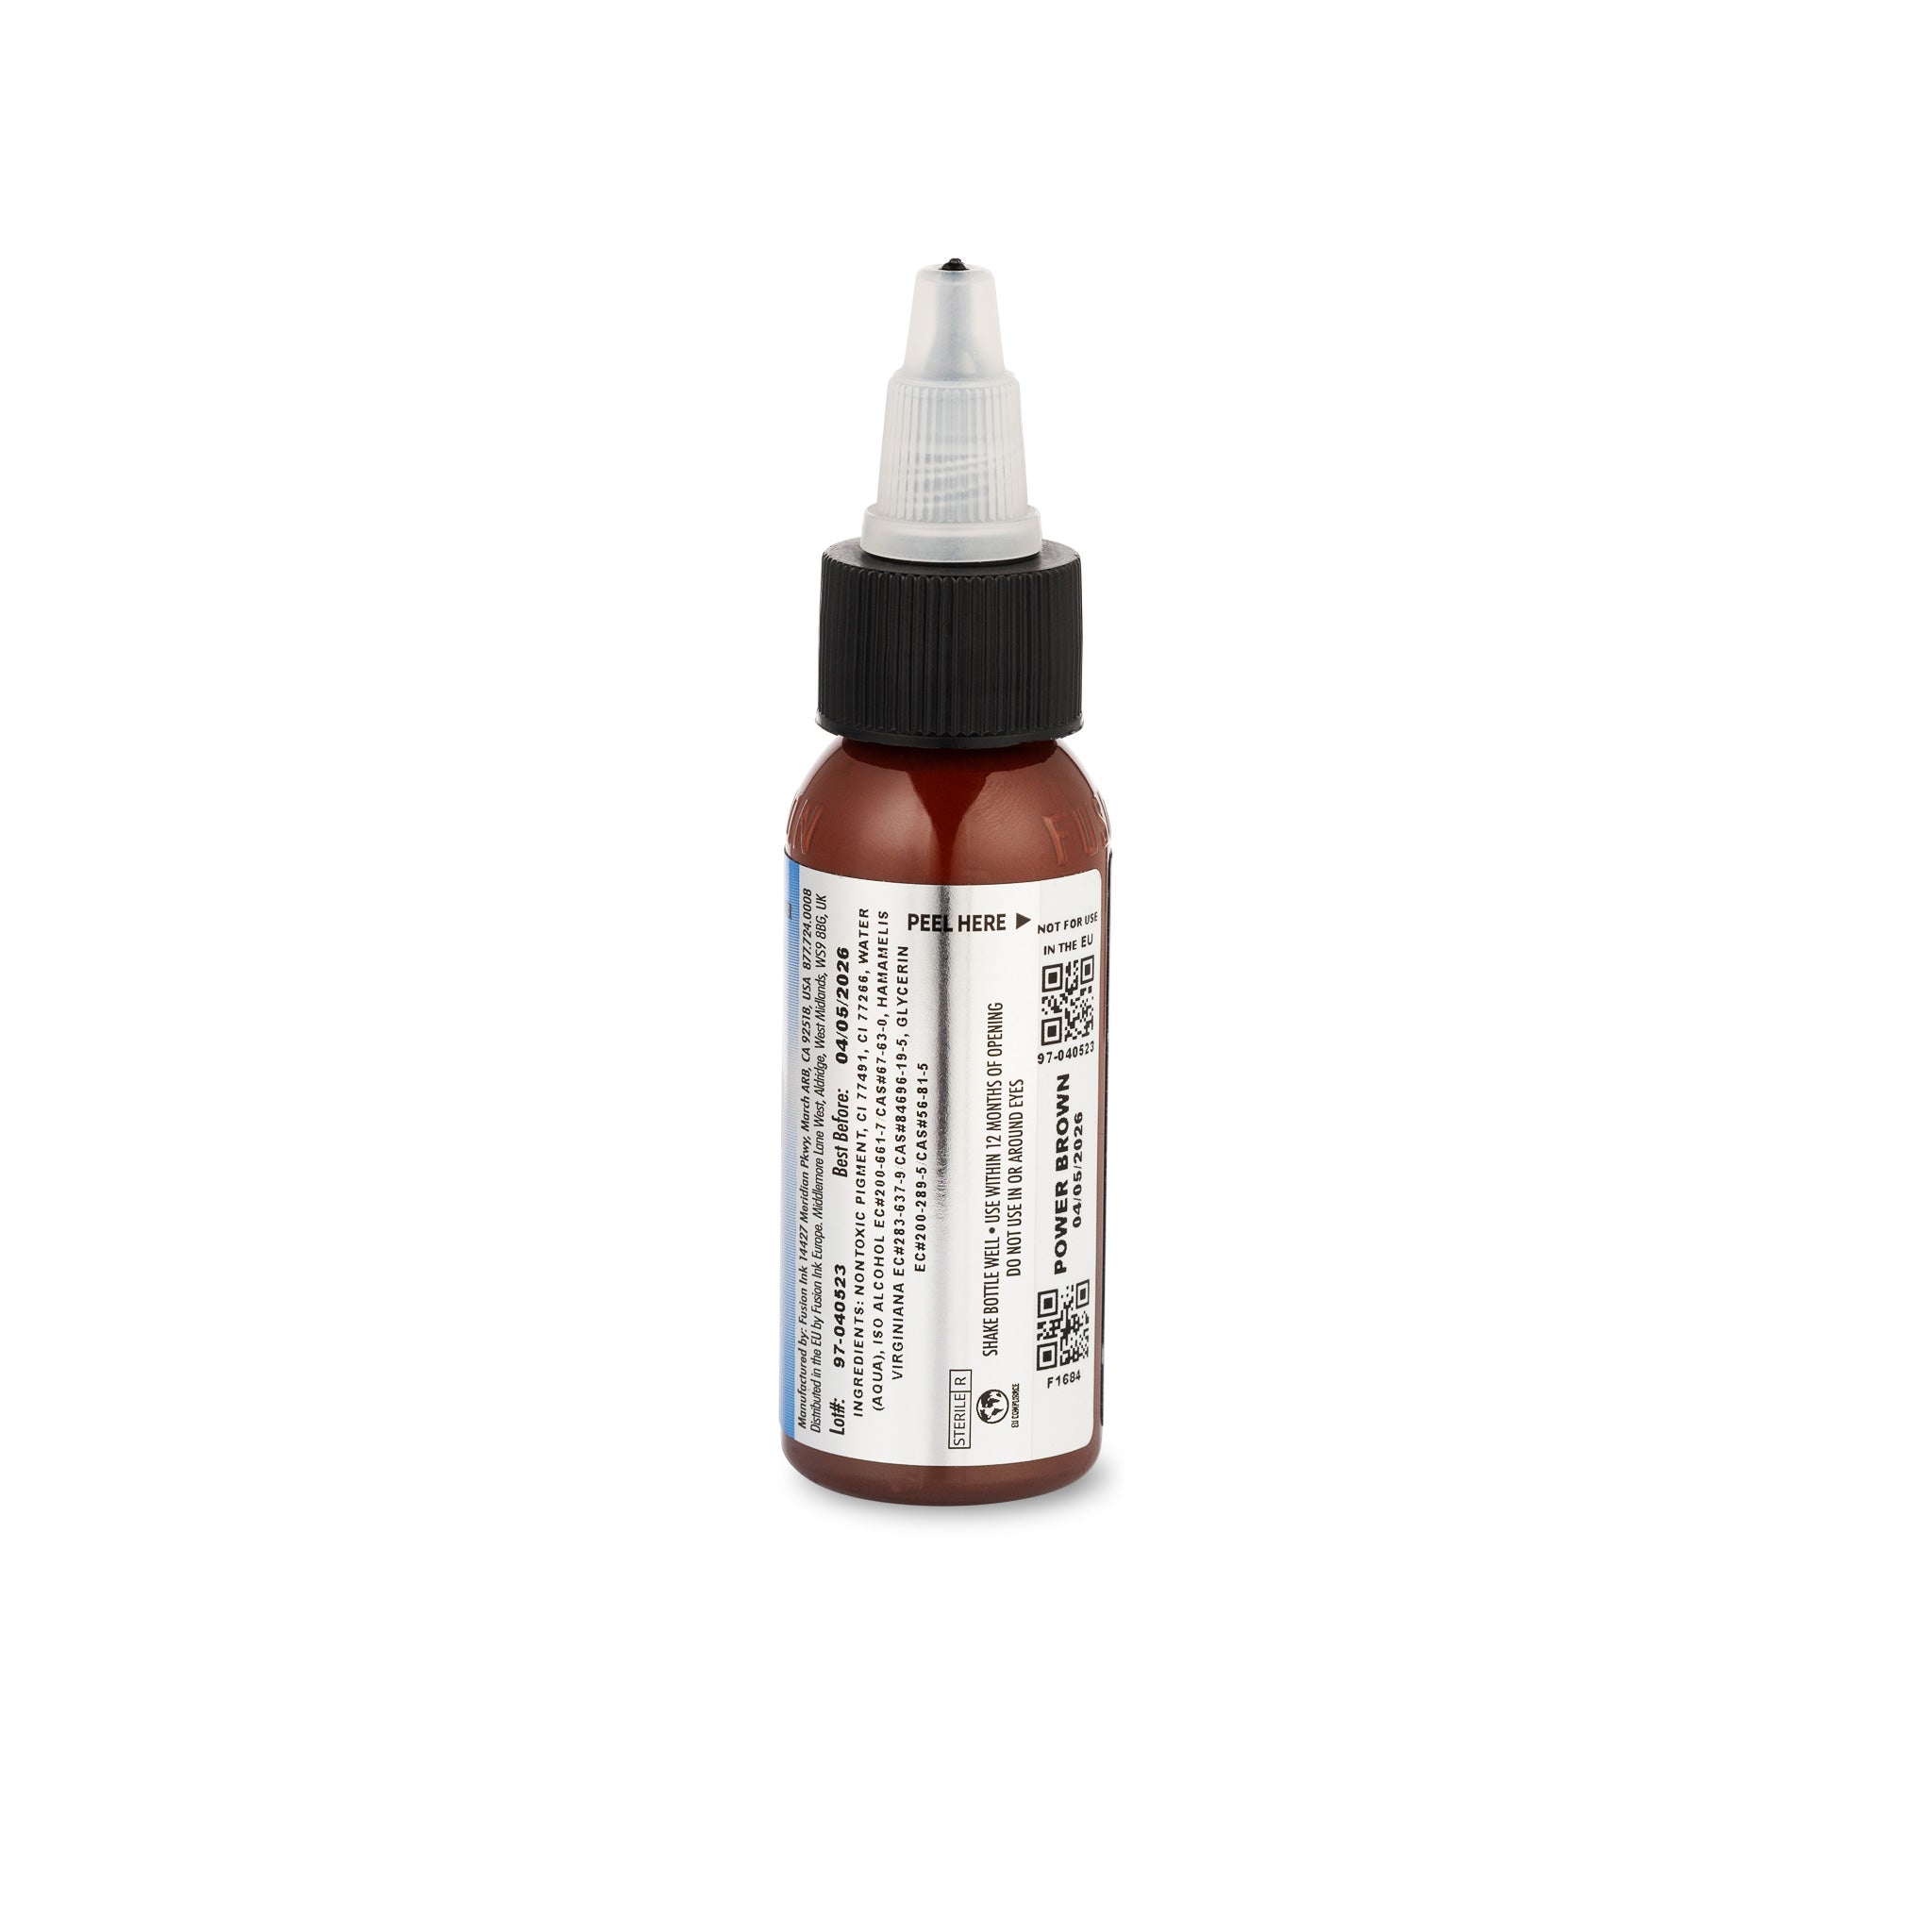 Fusion Power Brown Tattoo Ink 1 oz.